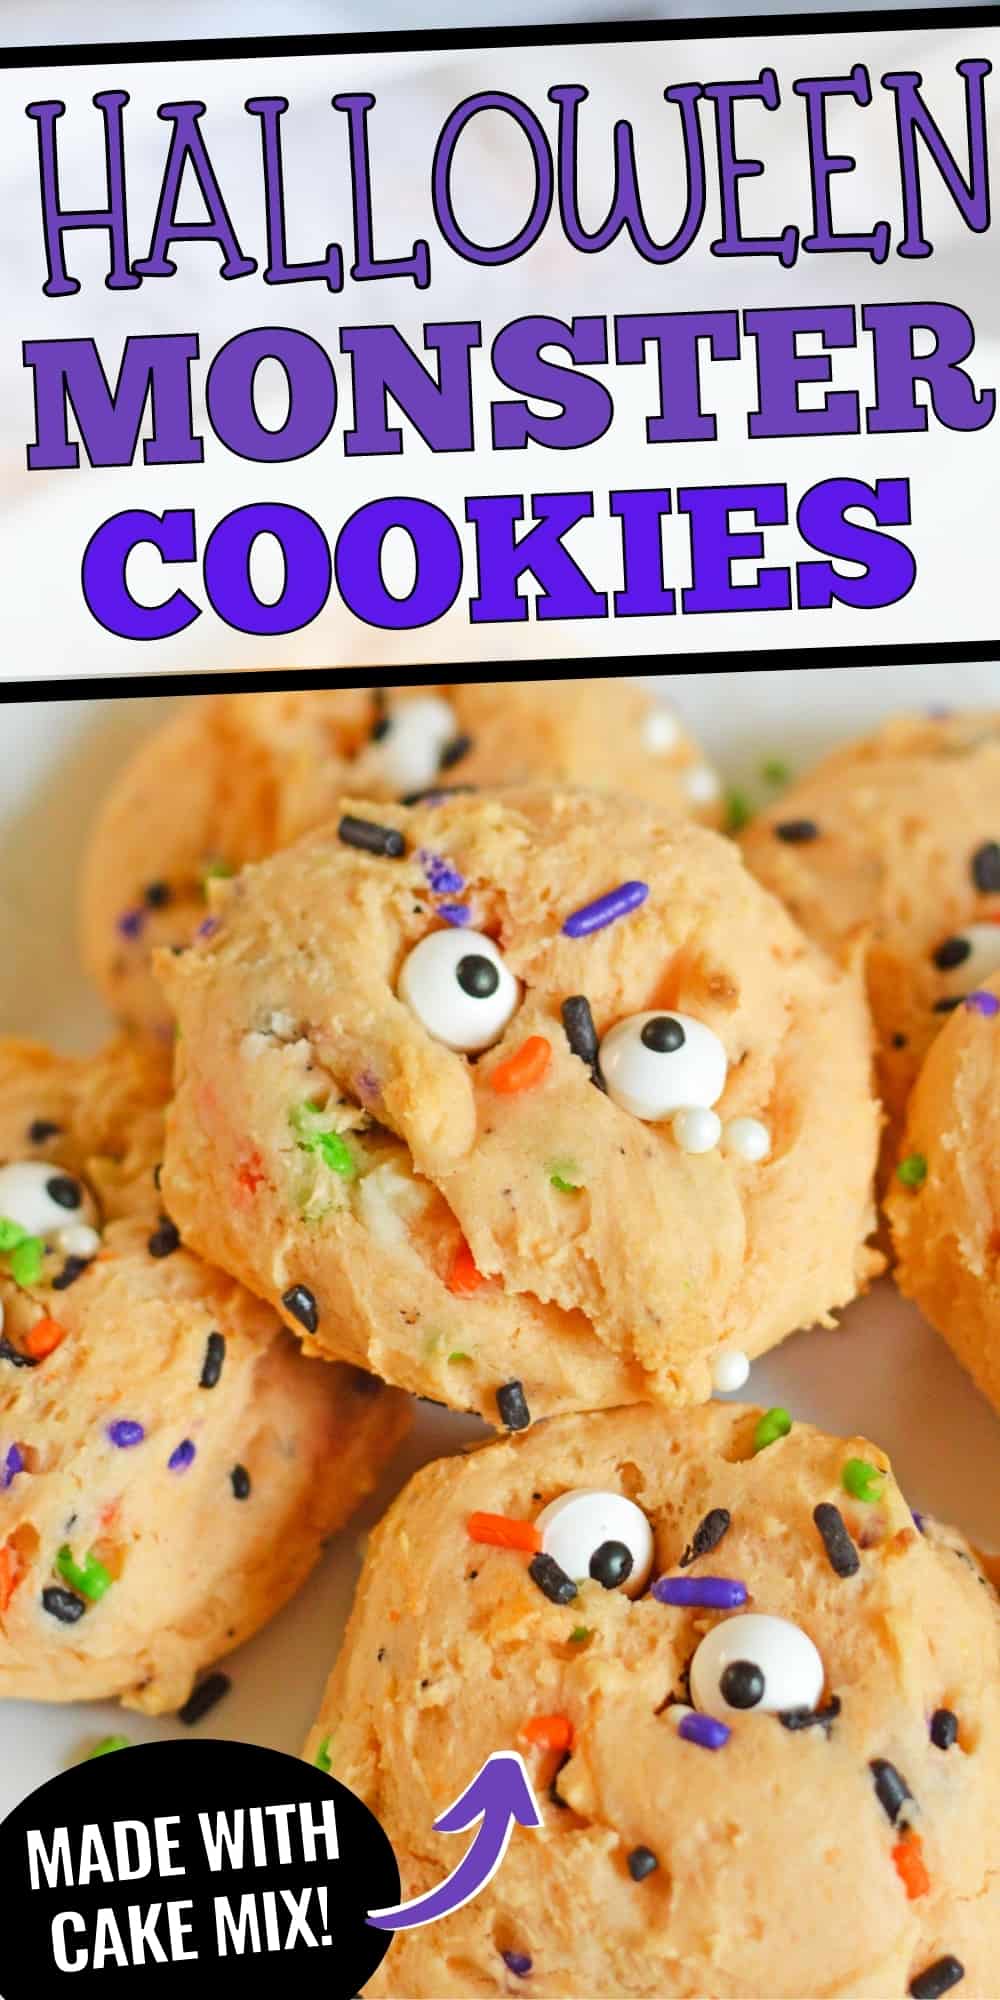 Halloween Monster Cookies with Cake Mix